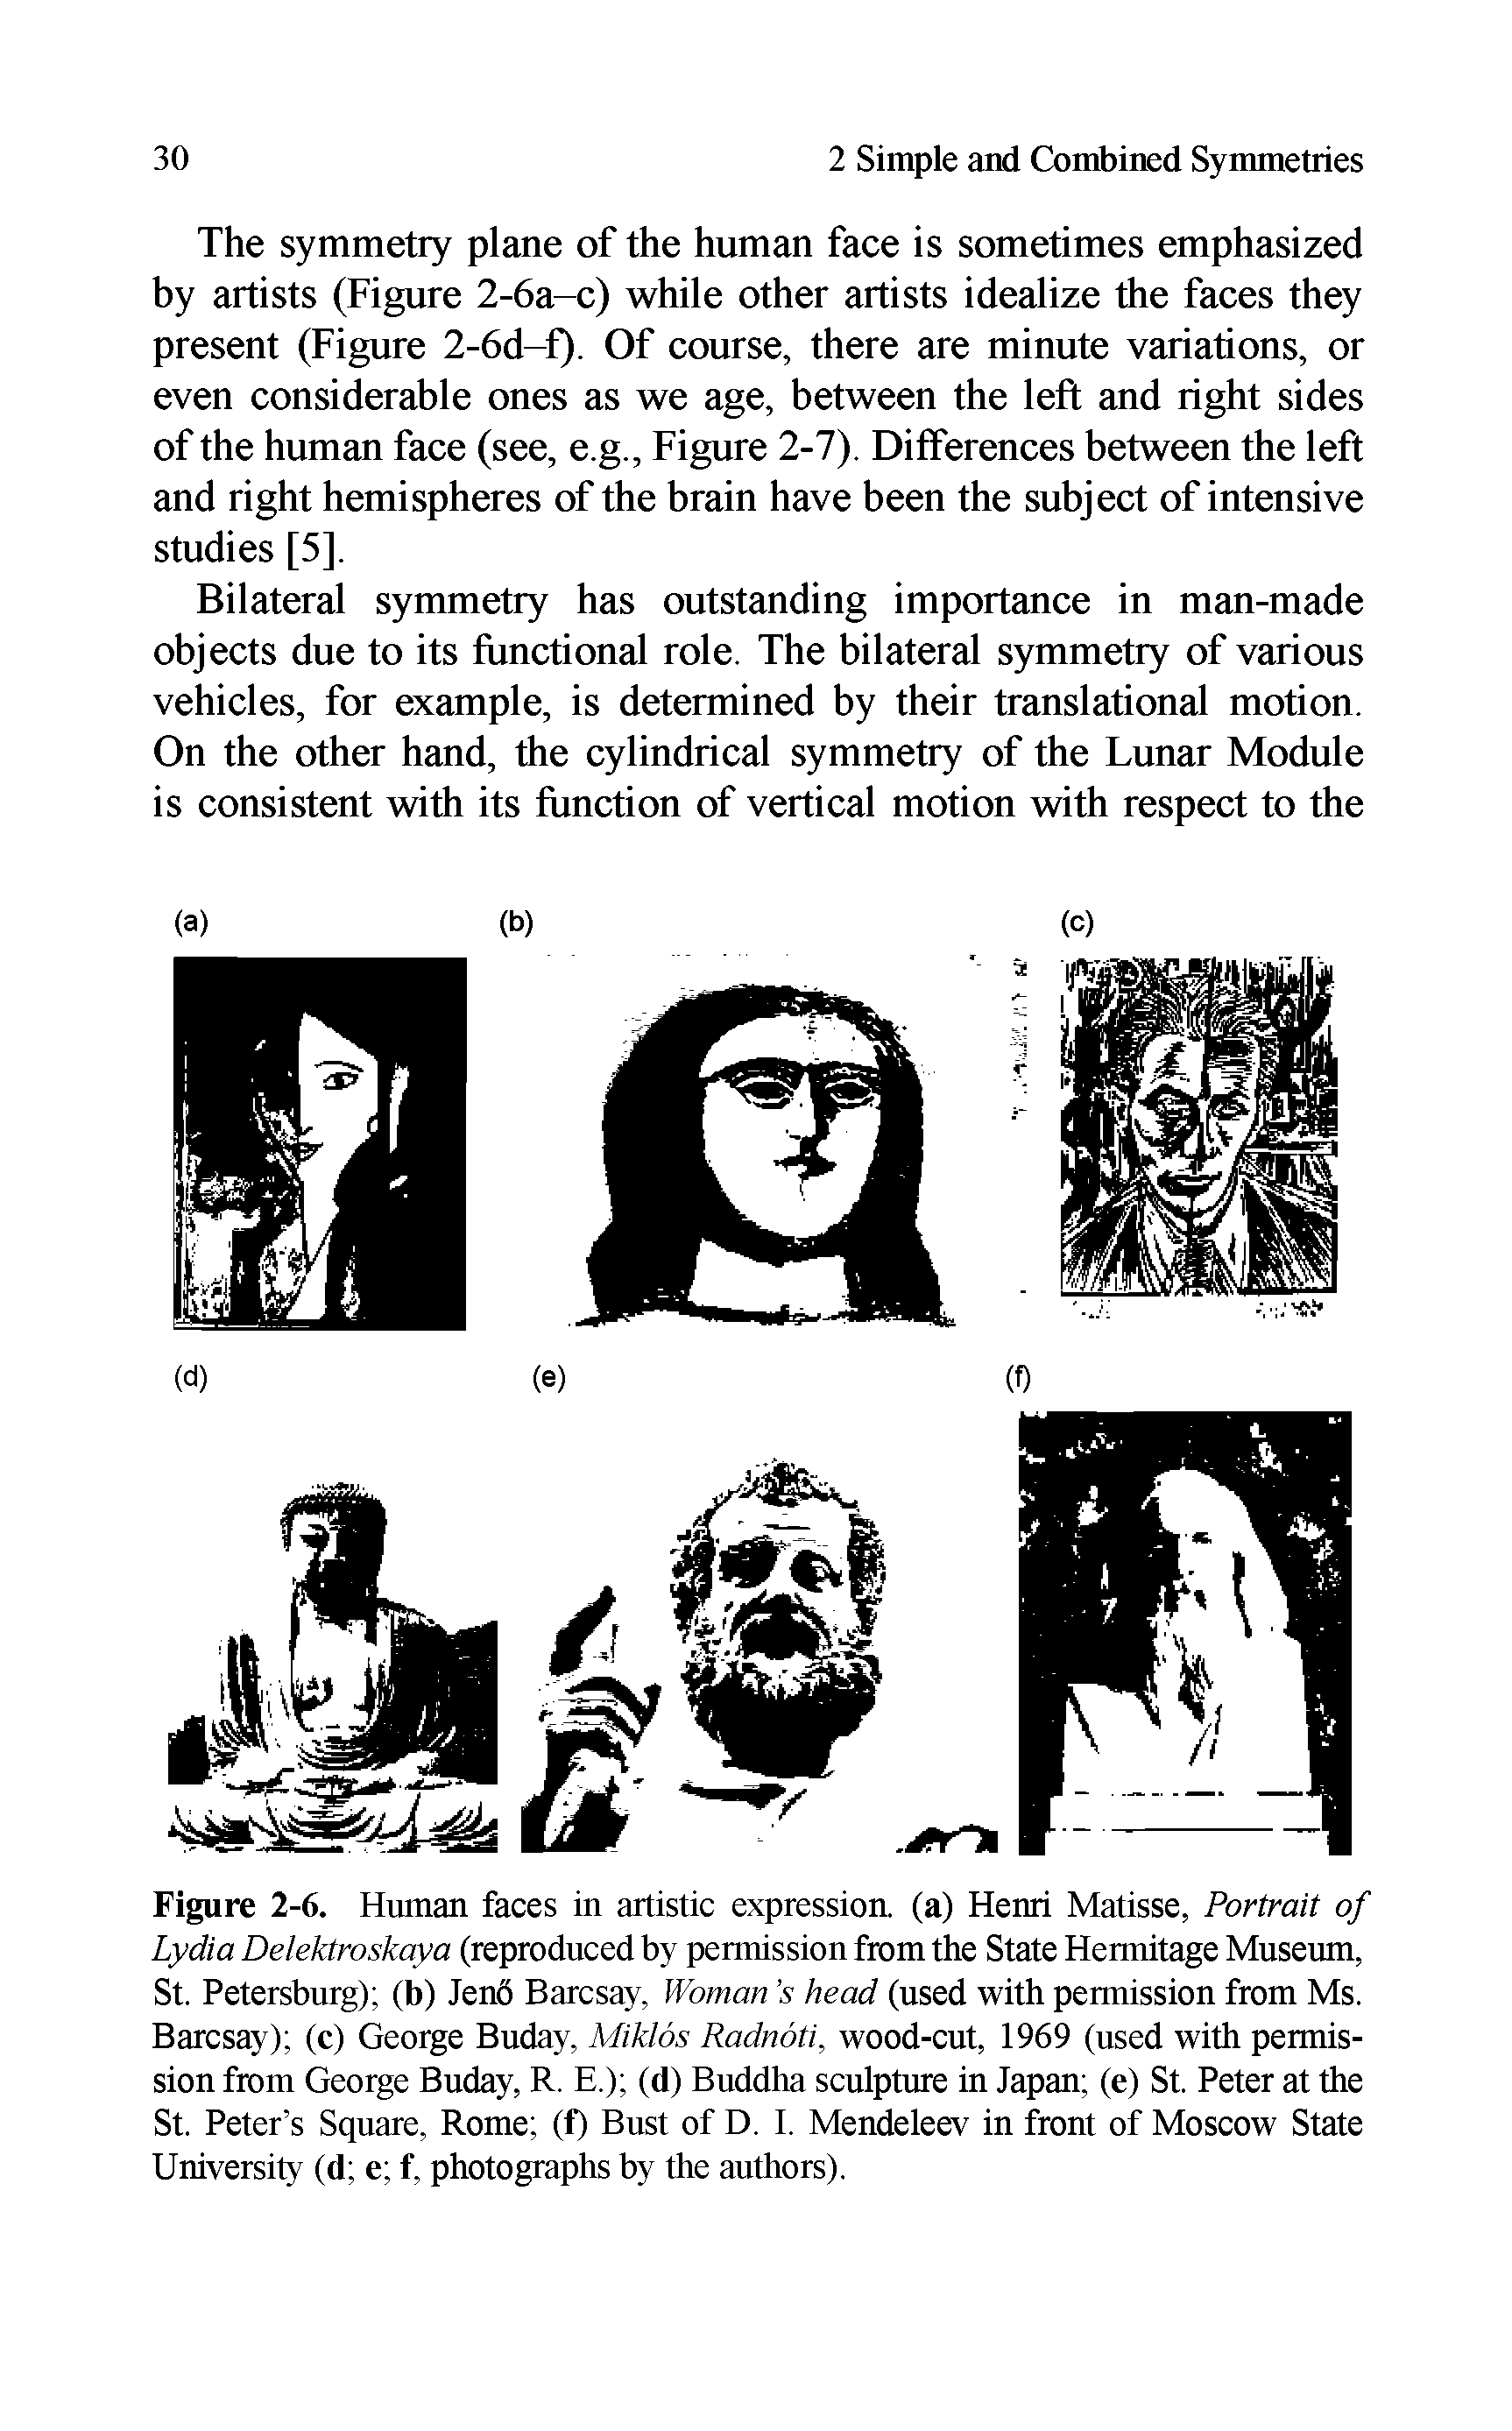 Figure 2-6. Human faces in artistic expression, (a) Henri Matisse, Portrait of Lydia Delektroskaya (reproduced by permission from the State Hermitage Museum, St. Petersburg) (b) Jeno Barcsay, Woman s head (used with permission from Ms. Barcsay) (c) George Buday, Miklos Radnoti, wood-cut, 1969 (used with permission from George Buday, R. E.) (d) Buddha sculpture in Japan (e) St. Peter at the St. Peter s Square, Rome (f) Bust of D. I. Mendeleev in front of Moscow State University (d e f, photographs by the authors).